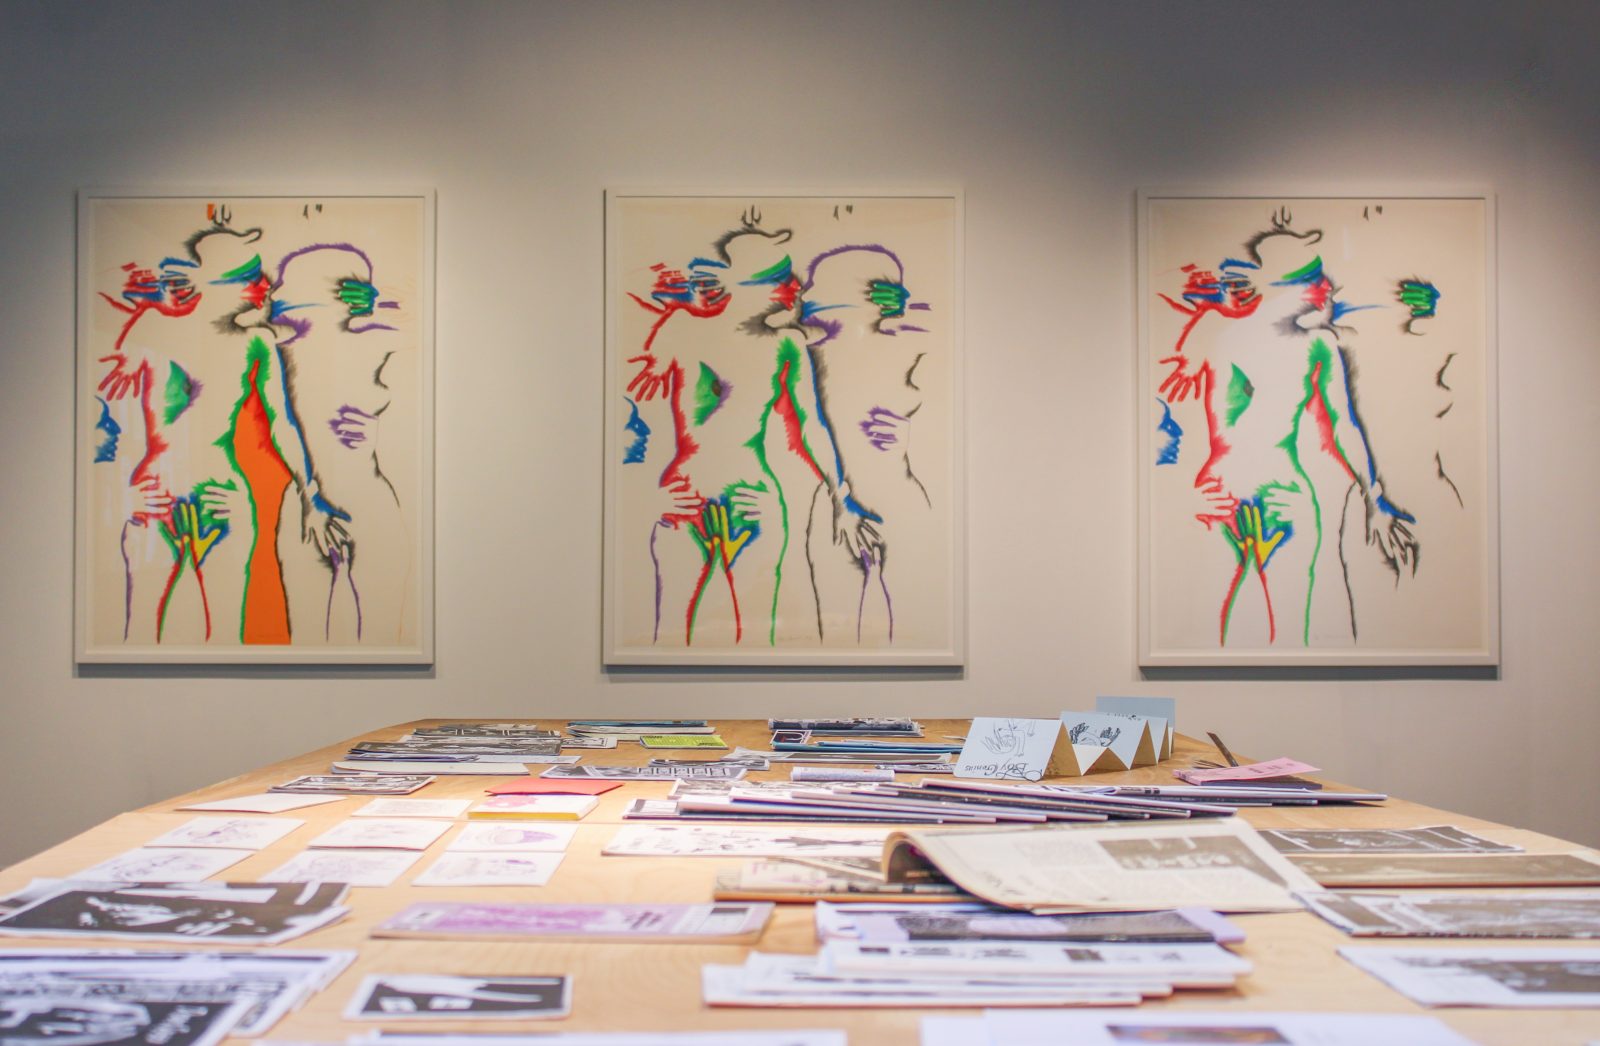 A set of three lithographs by the artist Marisol depicting intimately entangled human subjects in increasing color hang on a gallery wall facing the viewer while a wooden table holding student zines stands in the foreground